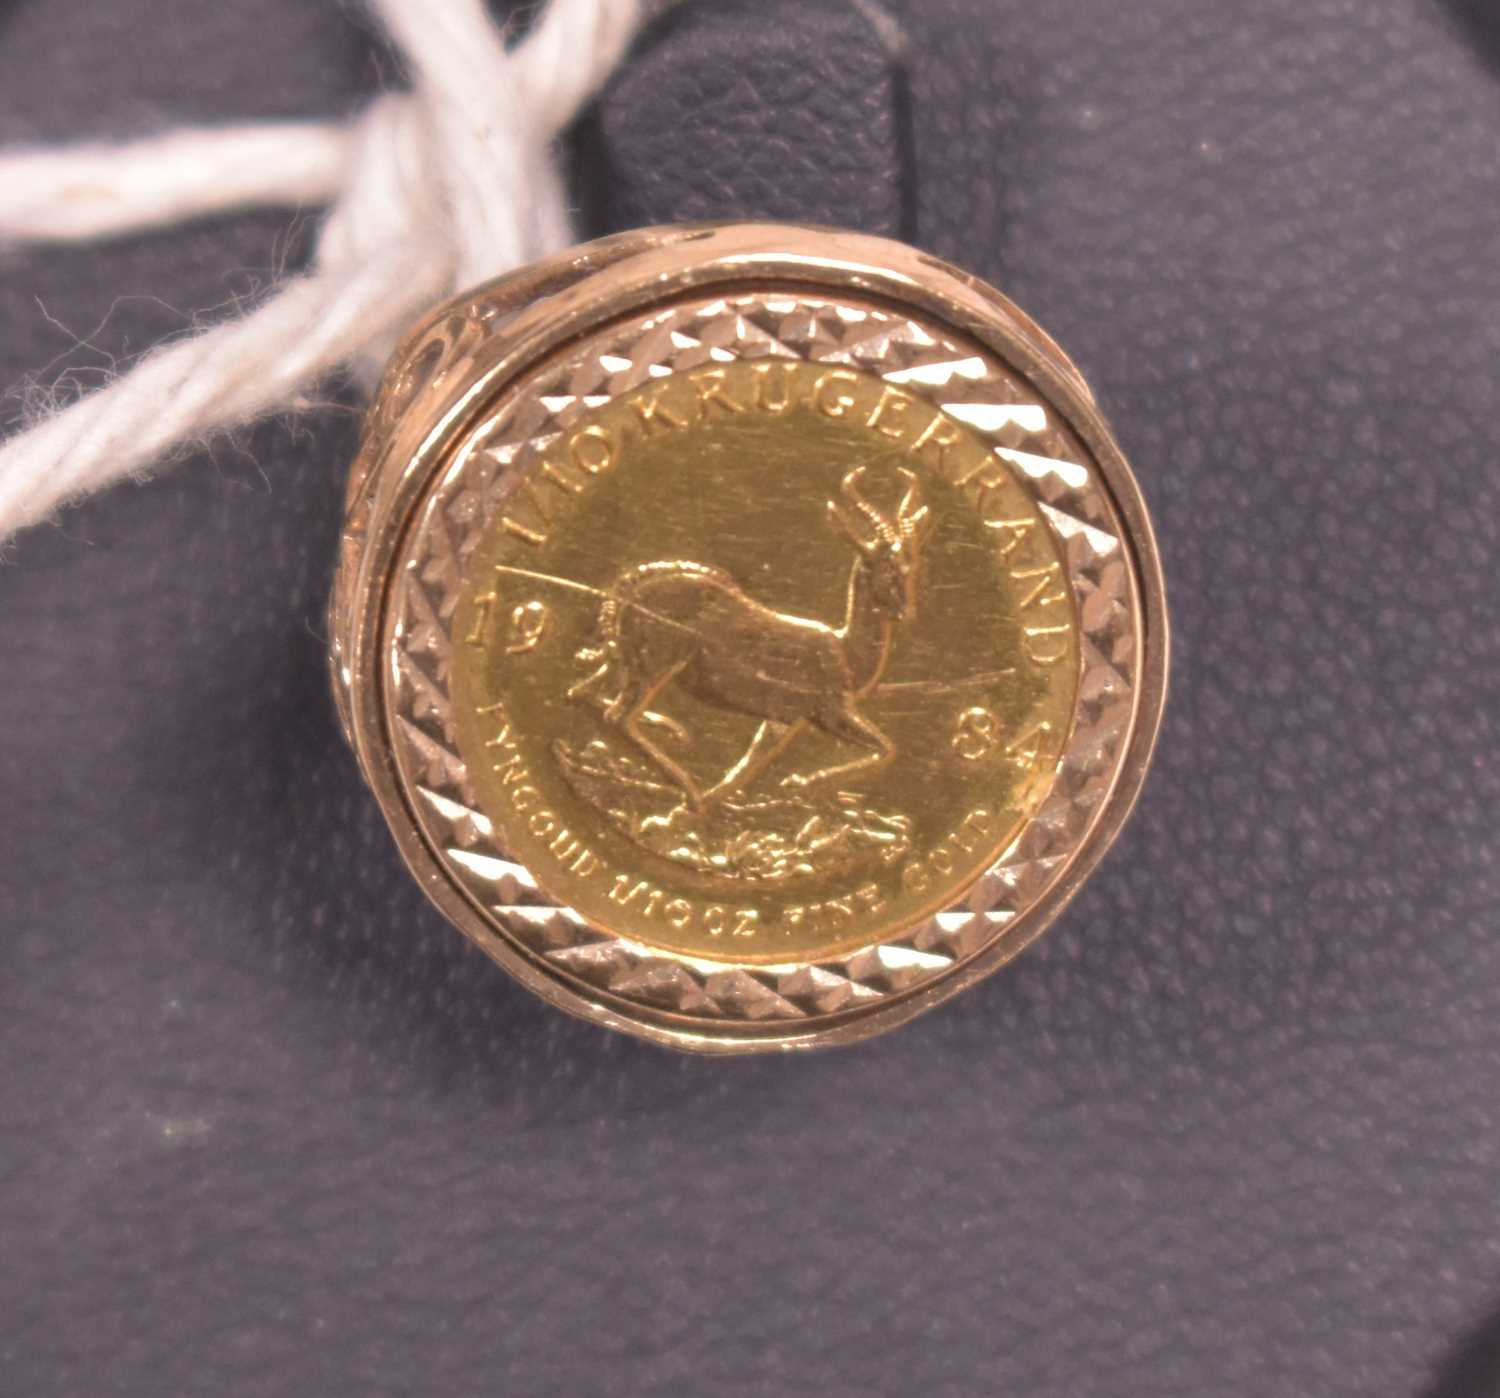 Lot 491 - 1/10 Krugerrand coin ring